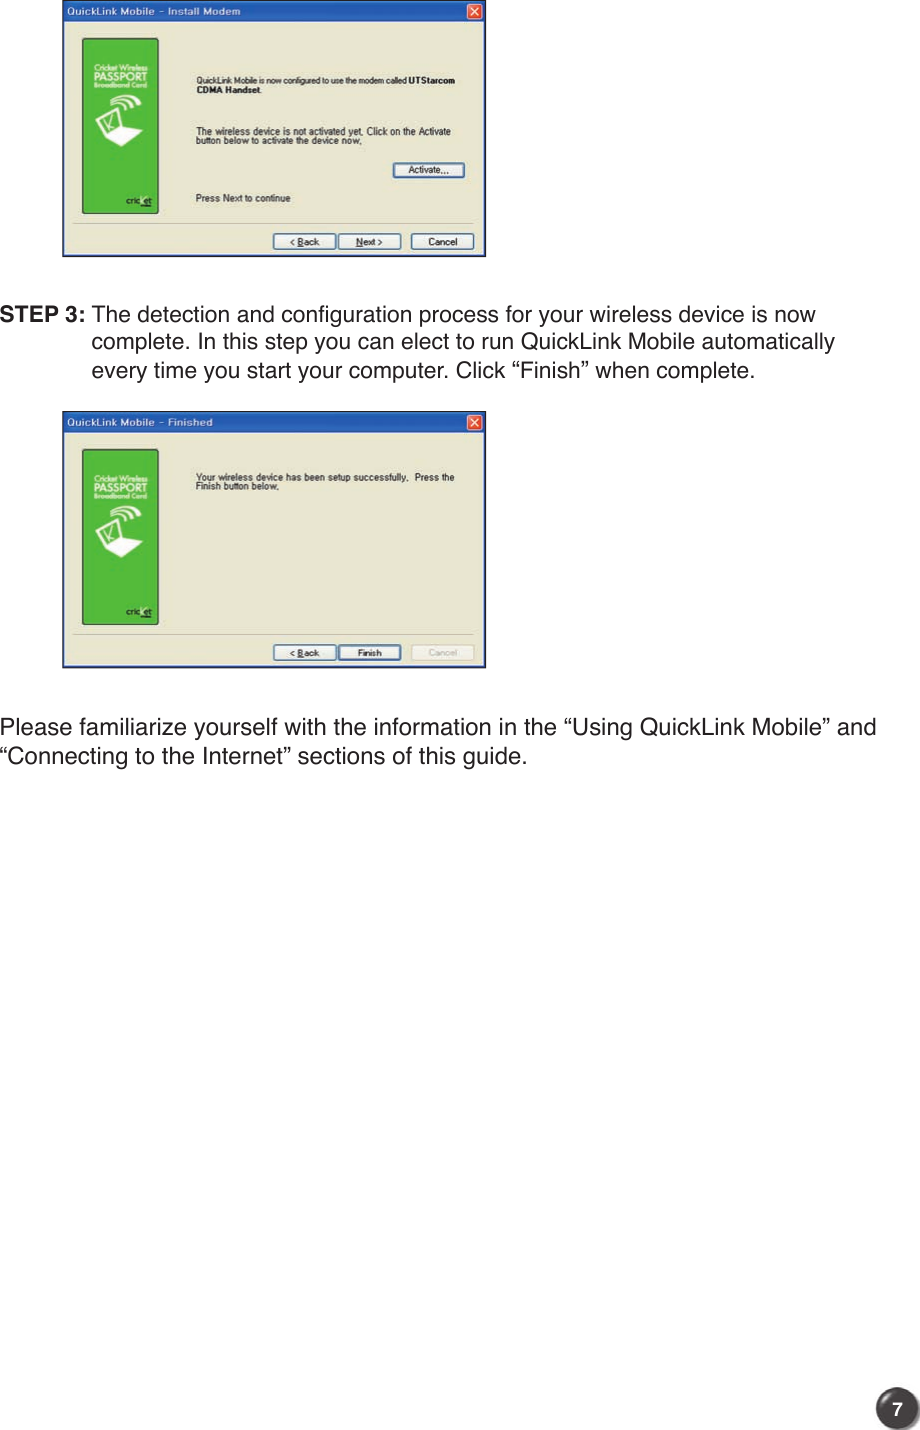 STEP 3:  The detection and configuration process for your wireless device is now complete. In this step you can elect to run QuickLink Mobile automatically every time you start your computer. Click “Finish” when complete.Please familiarize yourself with the information in the “Using QuickLink Mobile” and “Connecting to the Internet” sections of this guide.  76